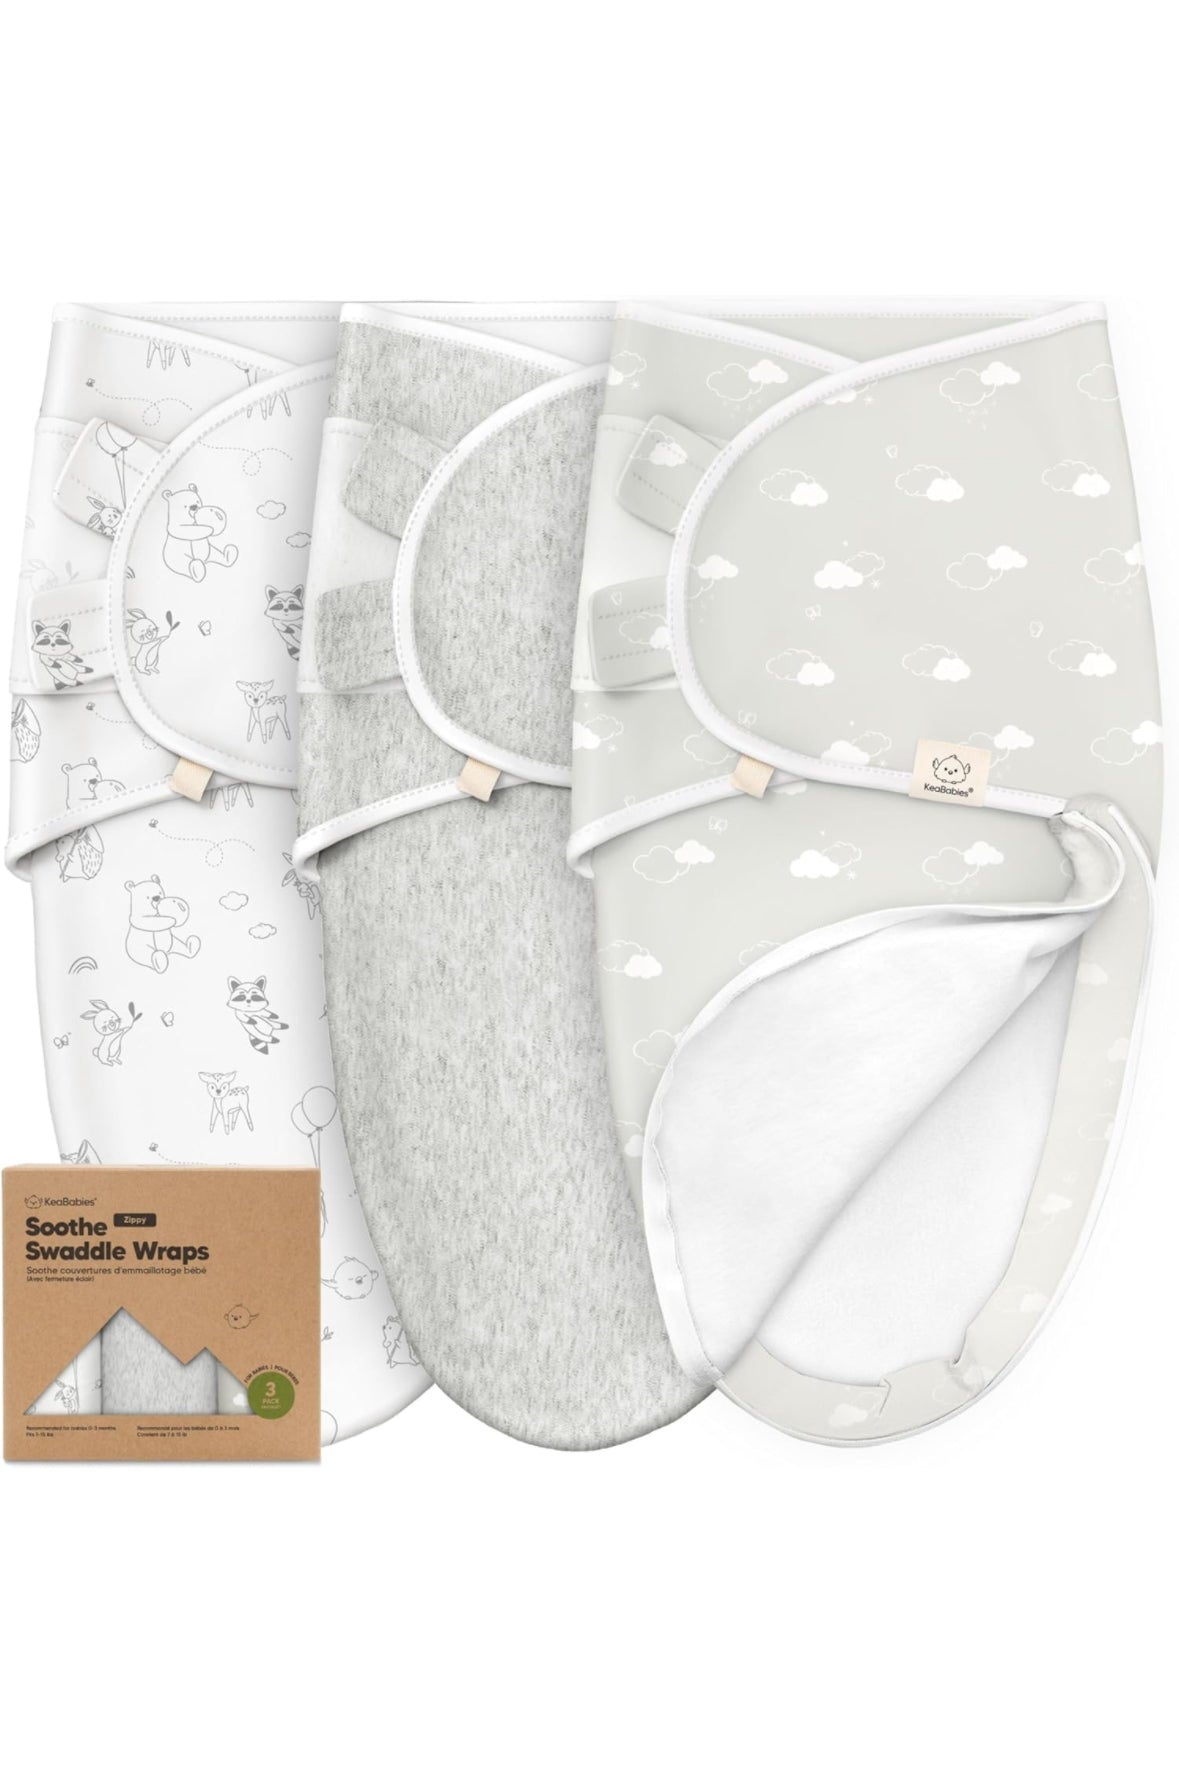 3-Pack Soothe Zippy Swaddle Wrap (Aspire)